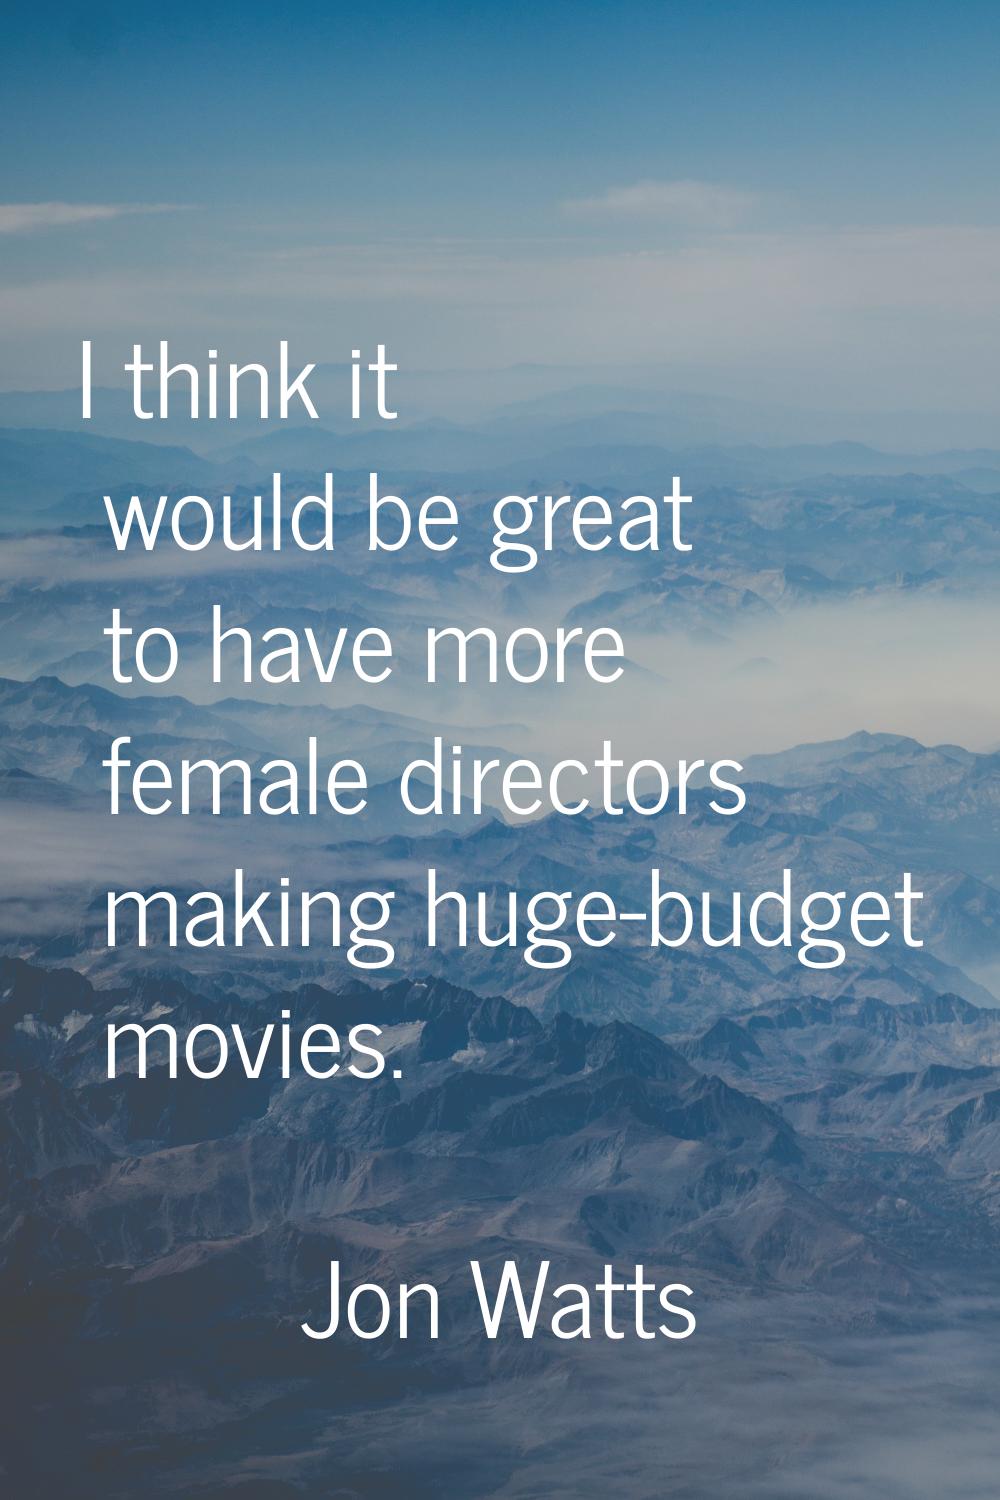 I think it would be great to have more female directors making huge-budget movies.